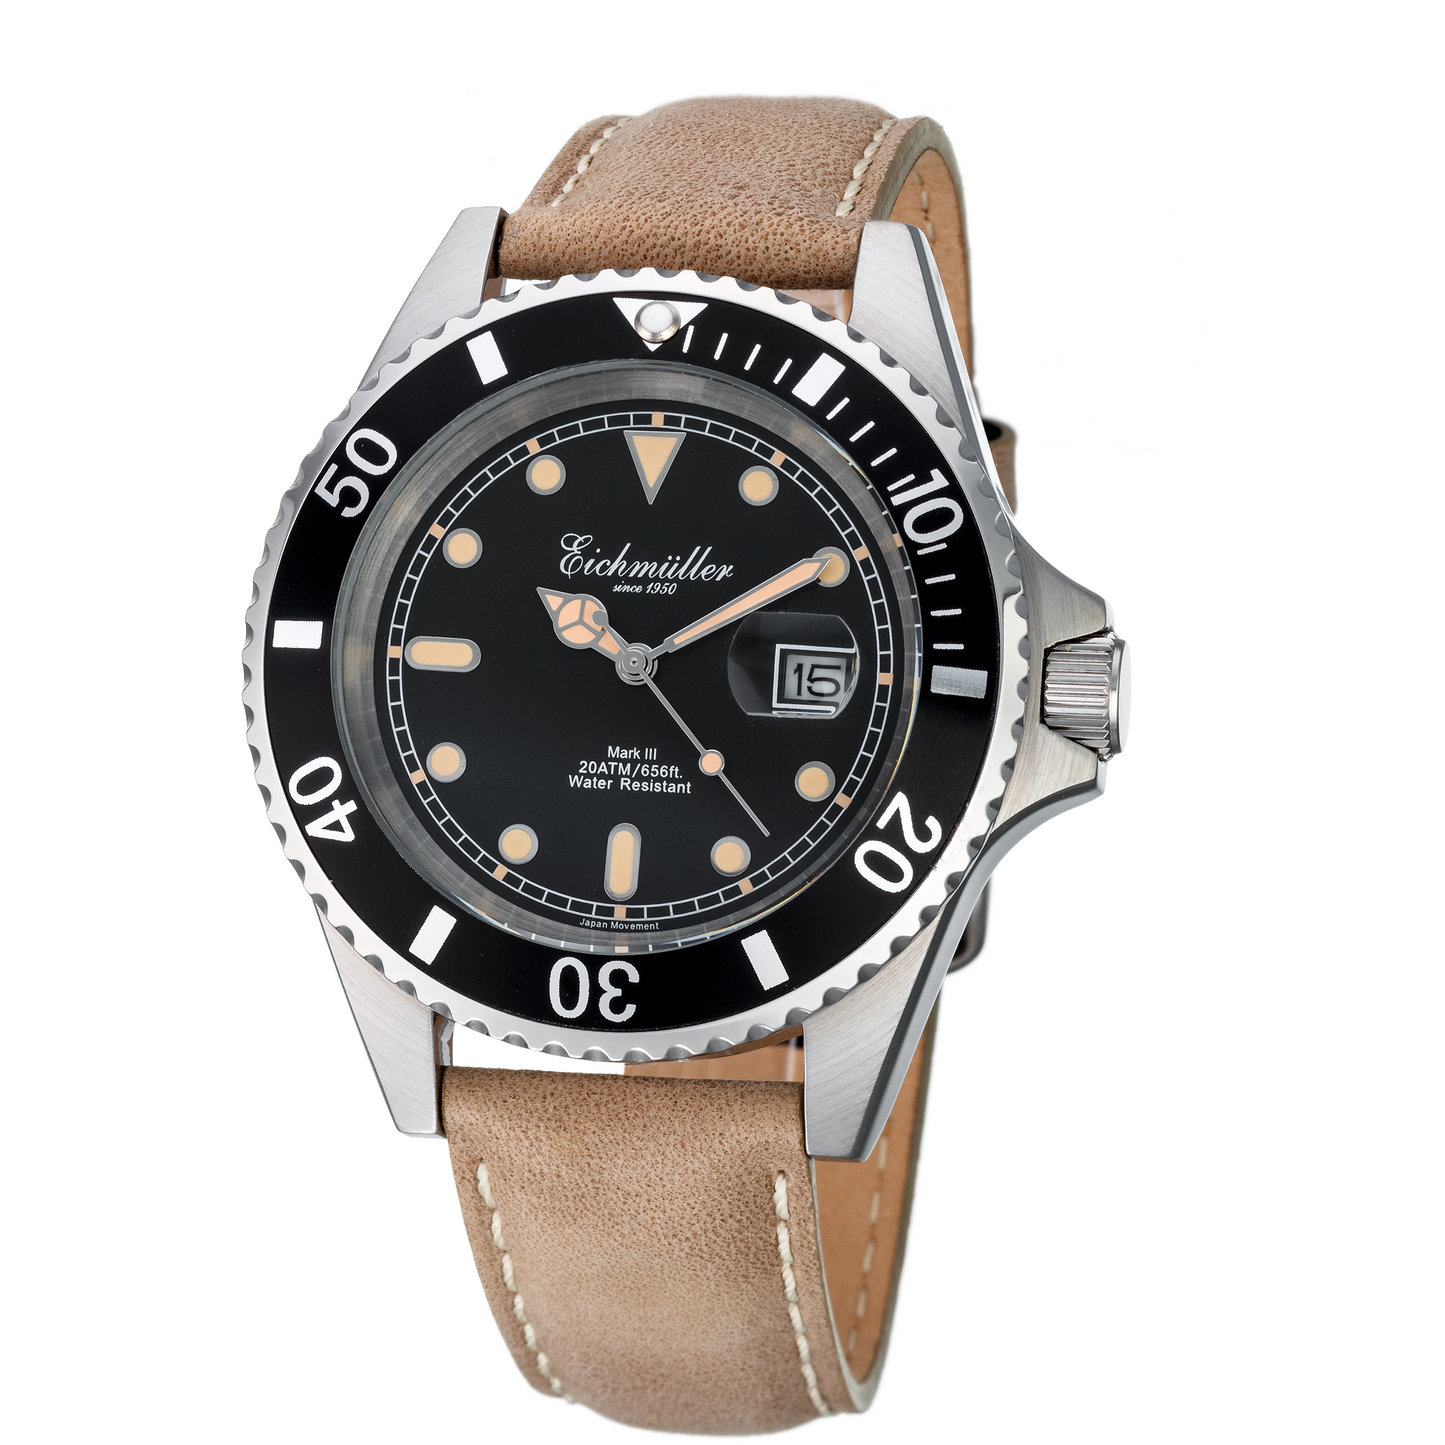 EICHMULLER since 1950 Mark III Diver Leather 20ATM Silver/Tan/Black Watch